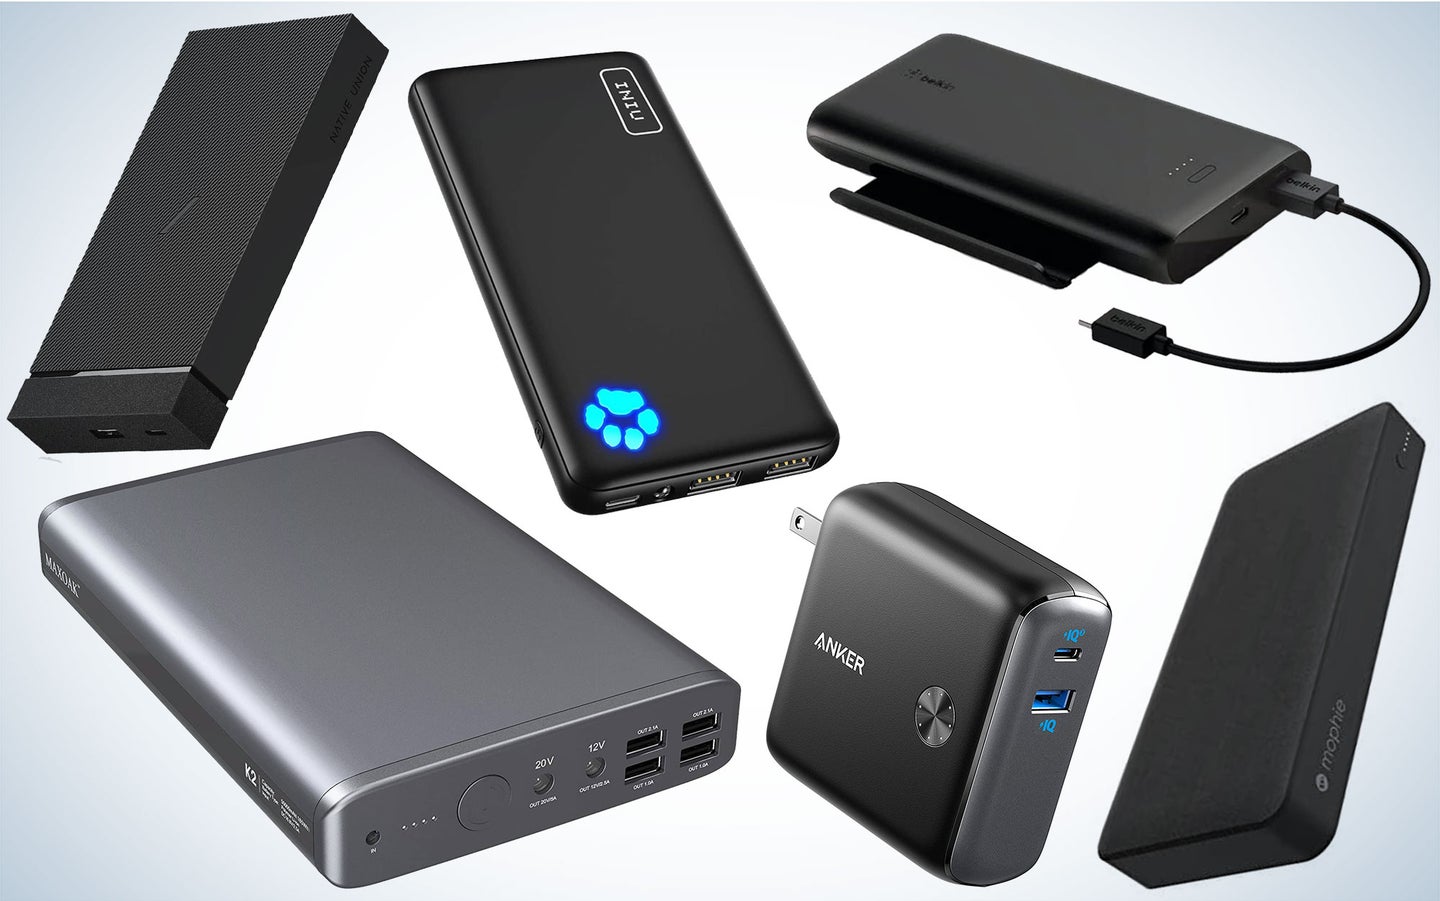 Best Portable Chargers